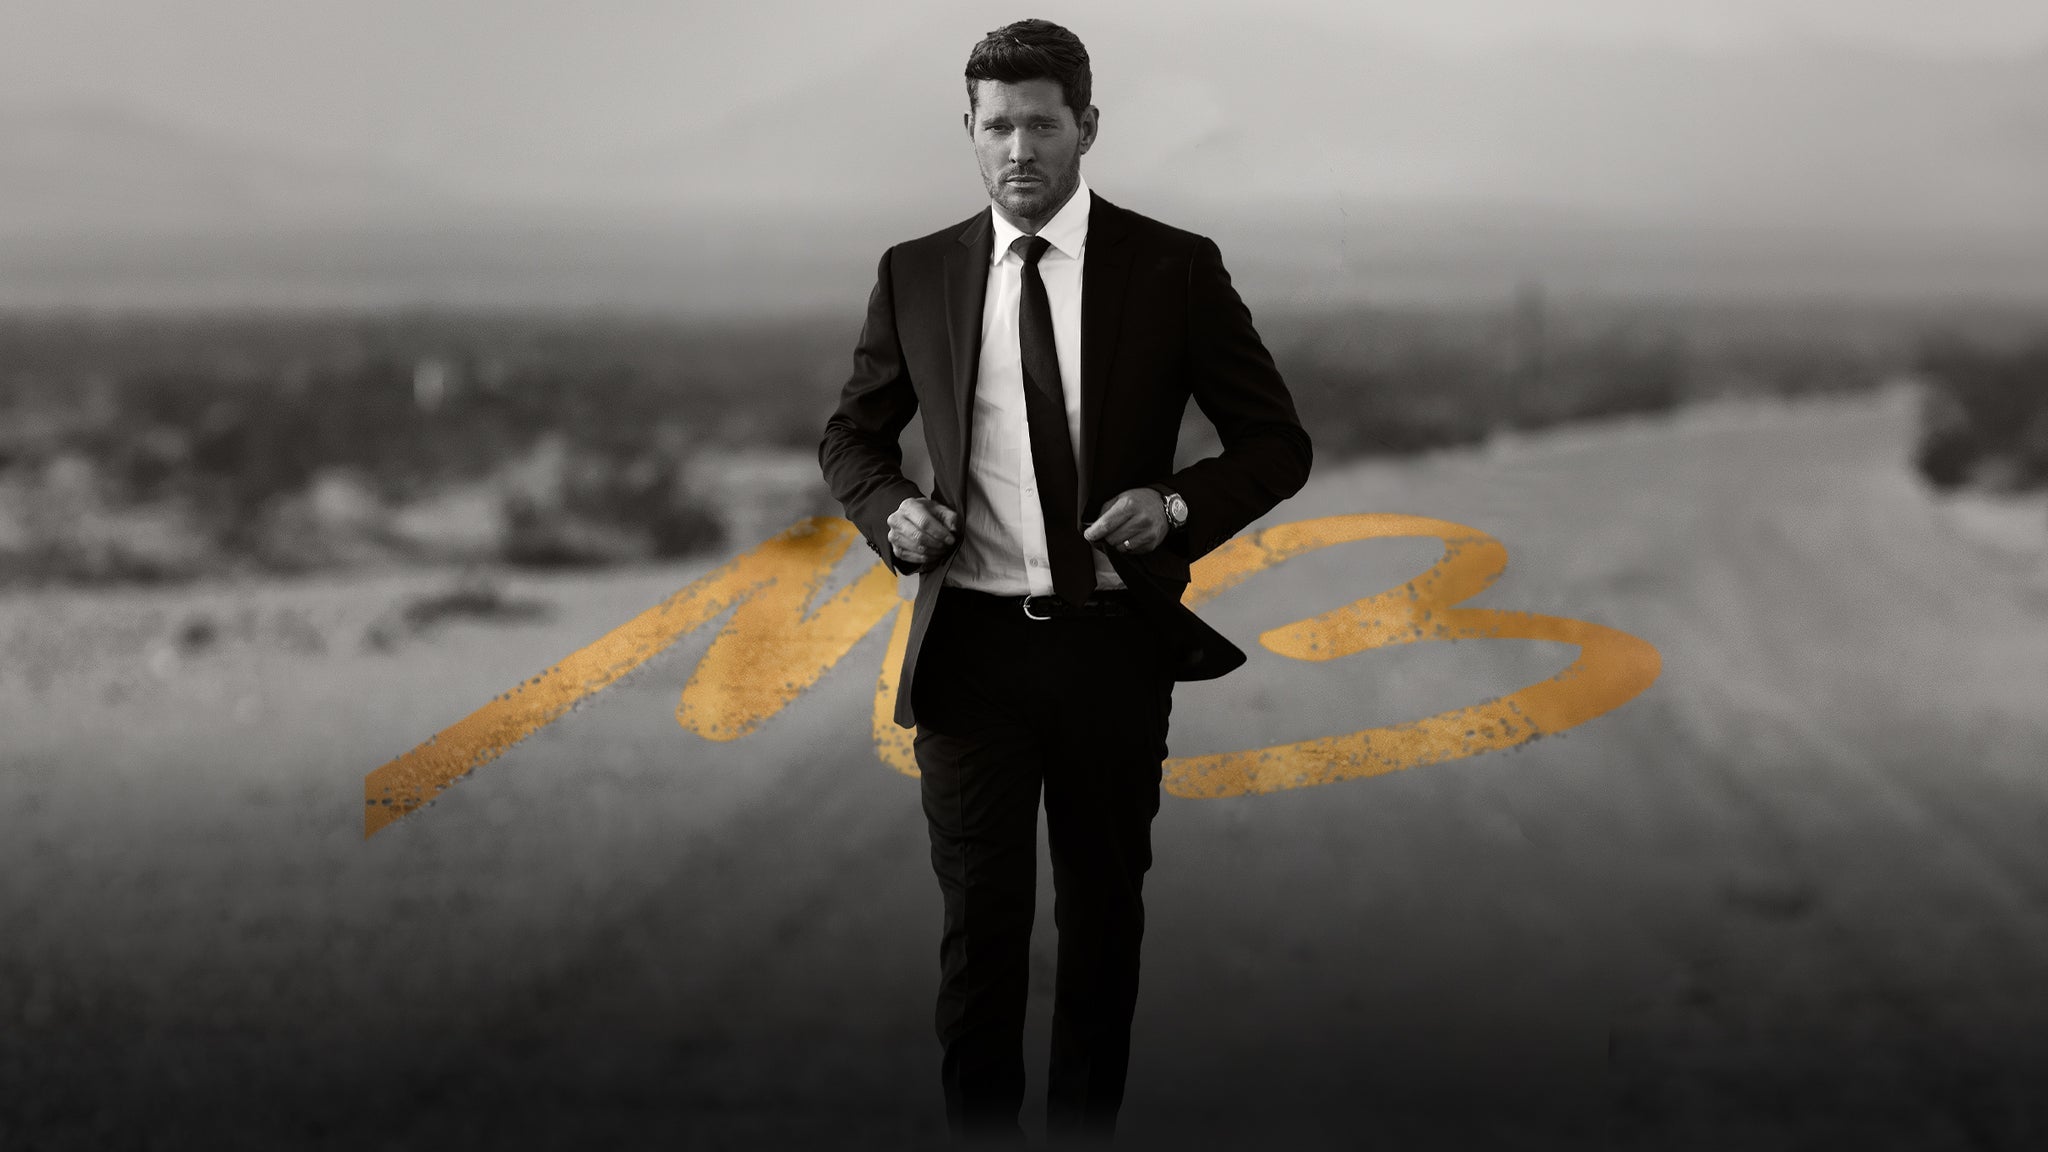 An Evening with Michael Bublé at Climate Pledge Arena